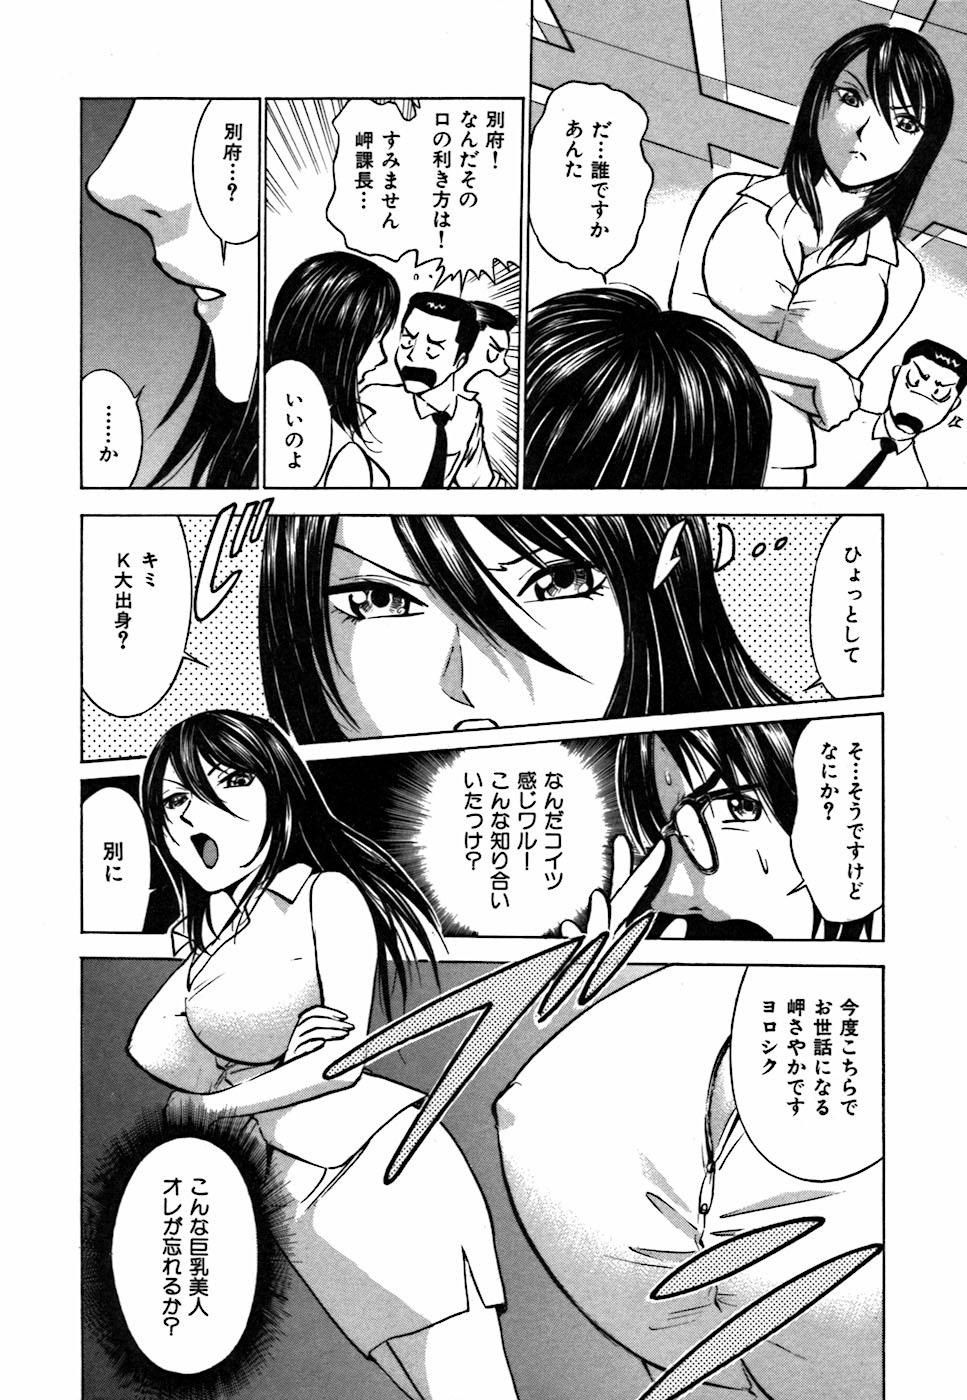 Trans Kimi ga Nozomu Katachi - Appearance for which you hope Milf Sex - Page 12